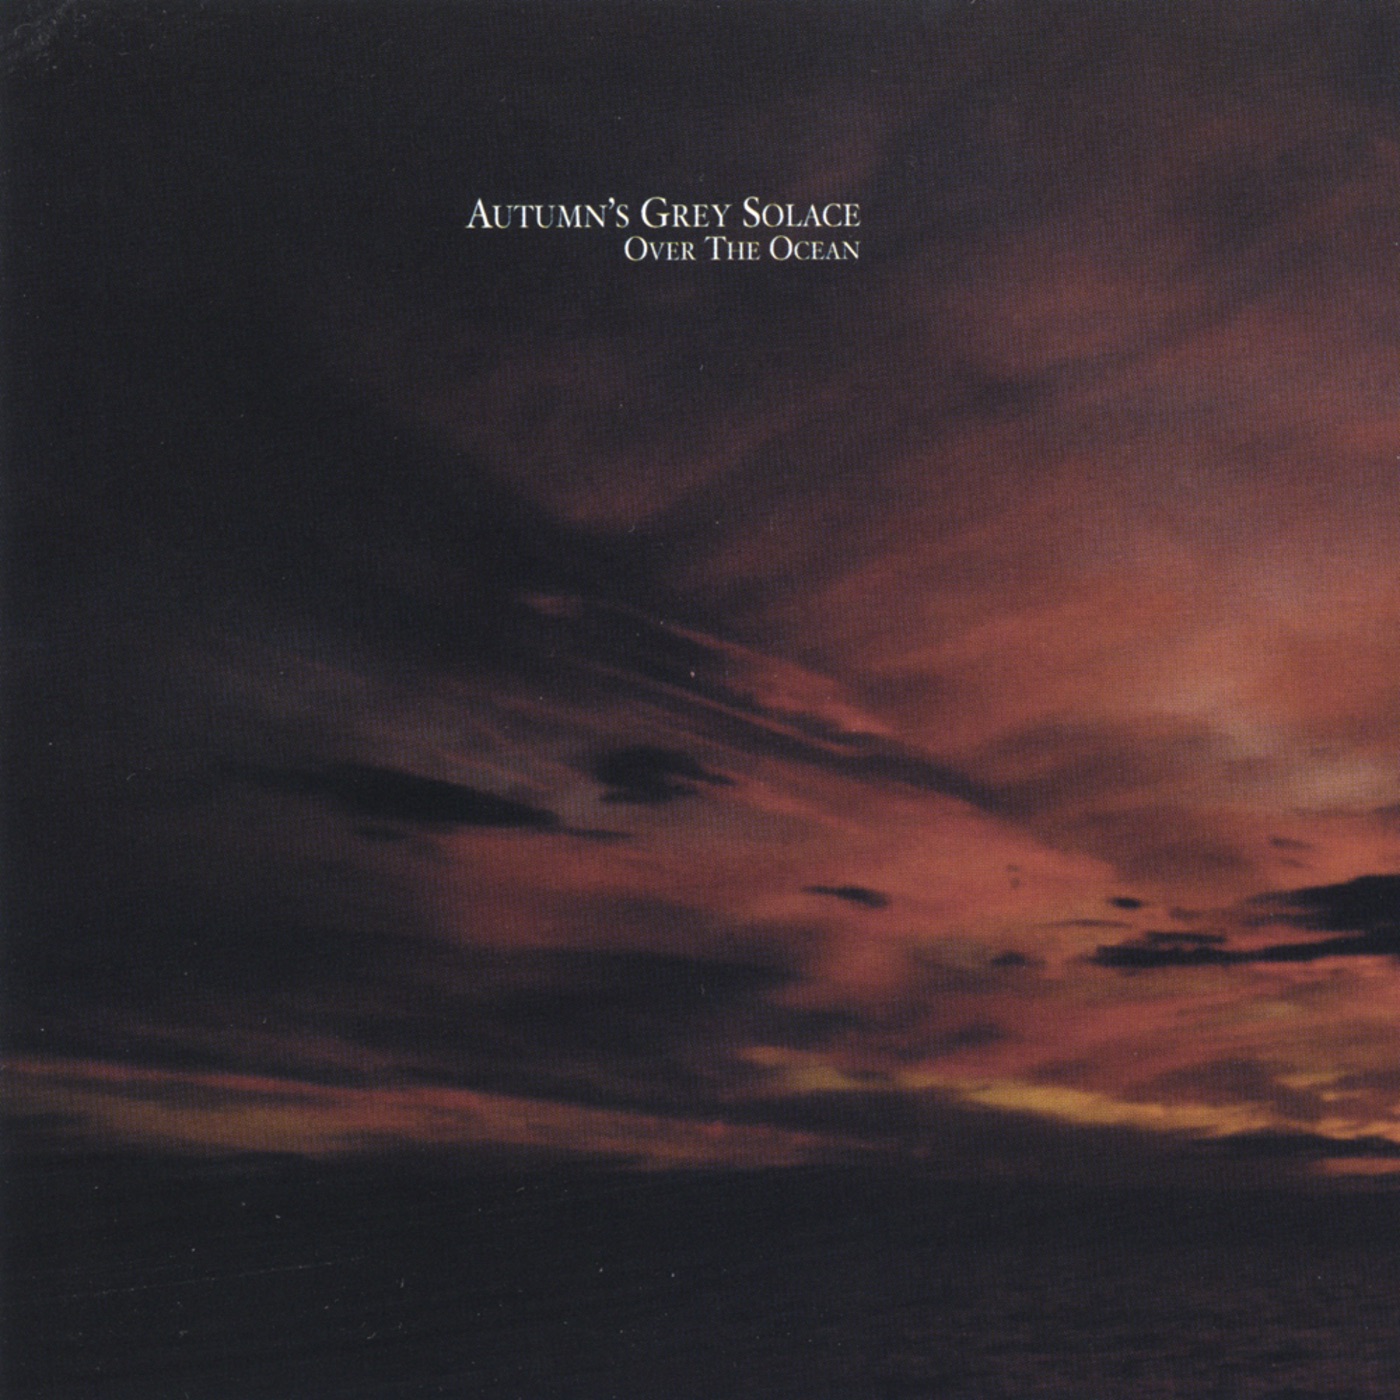 Over the Ocean by Autumn's Grey Solace